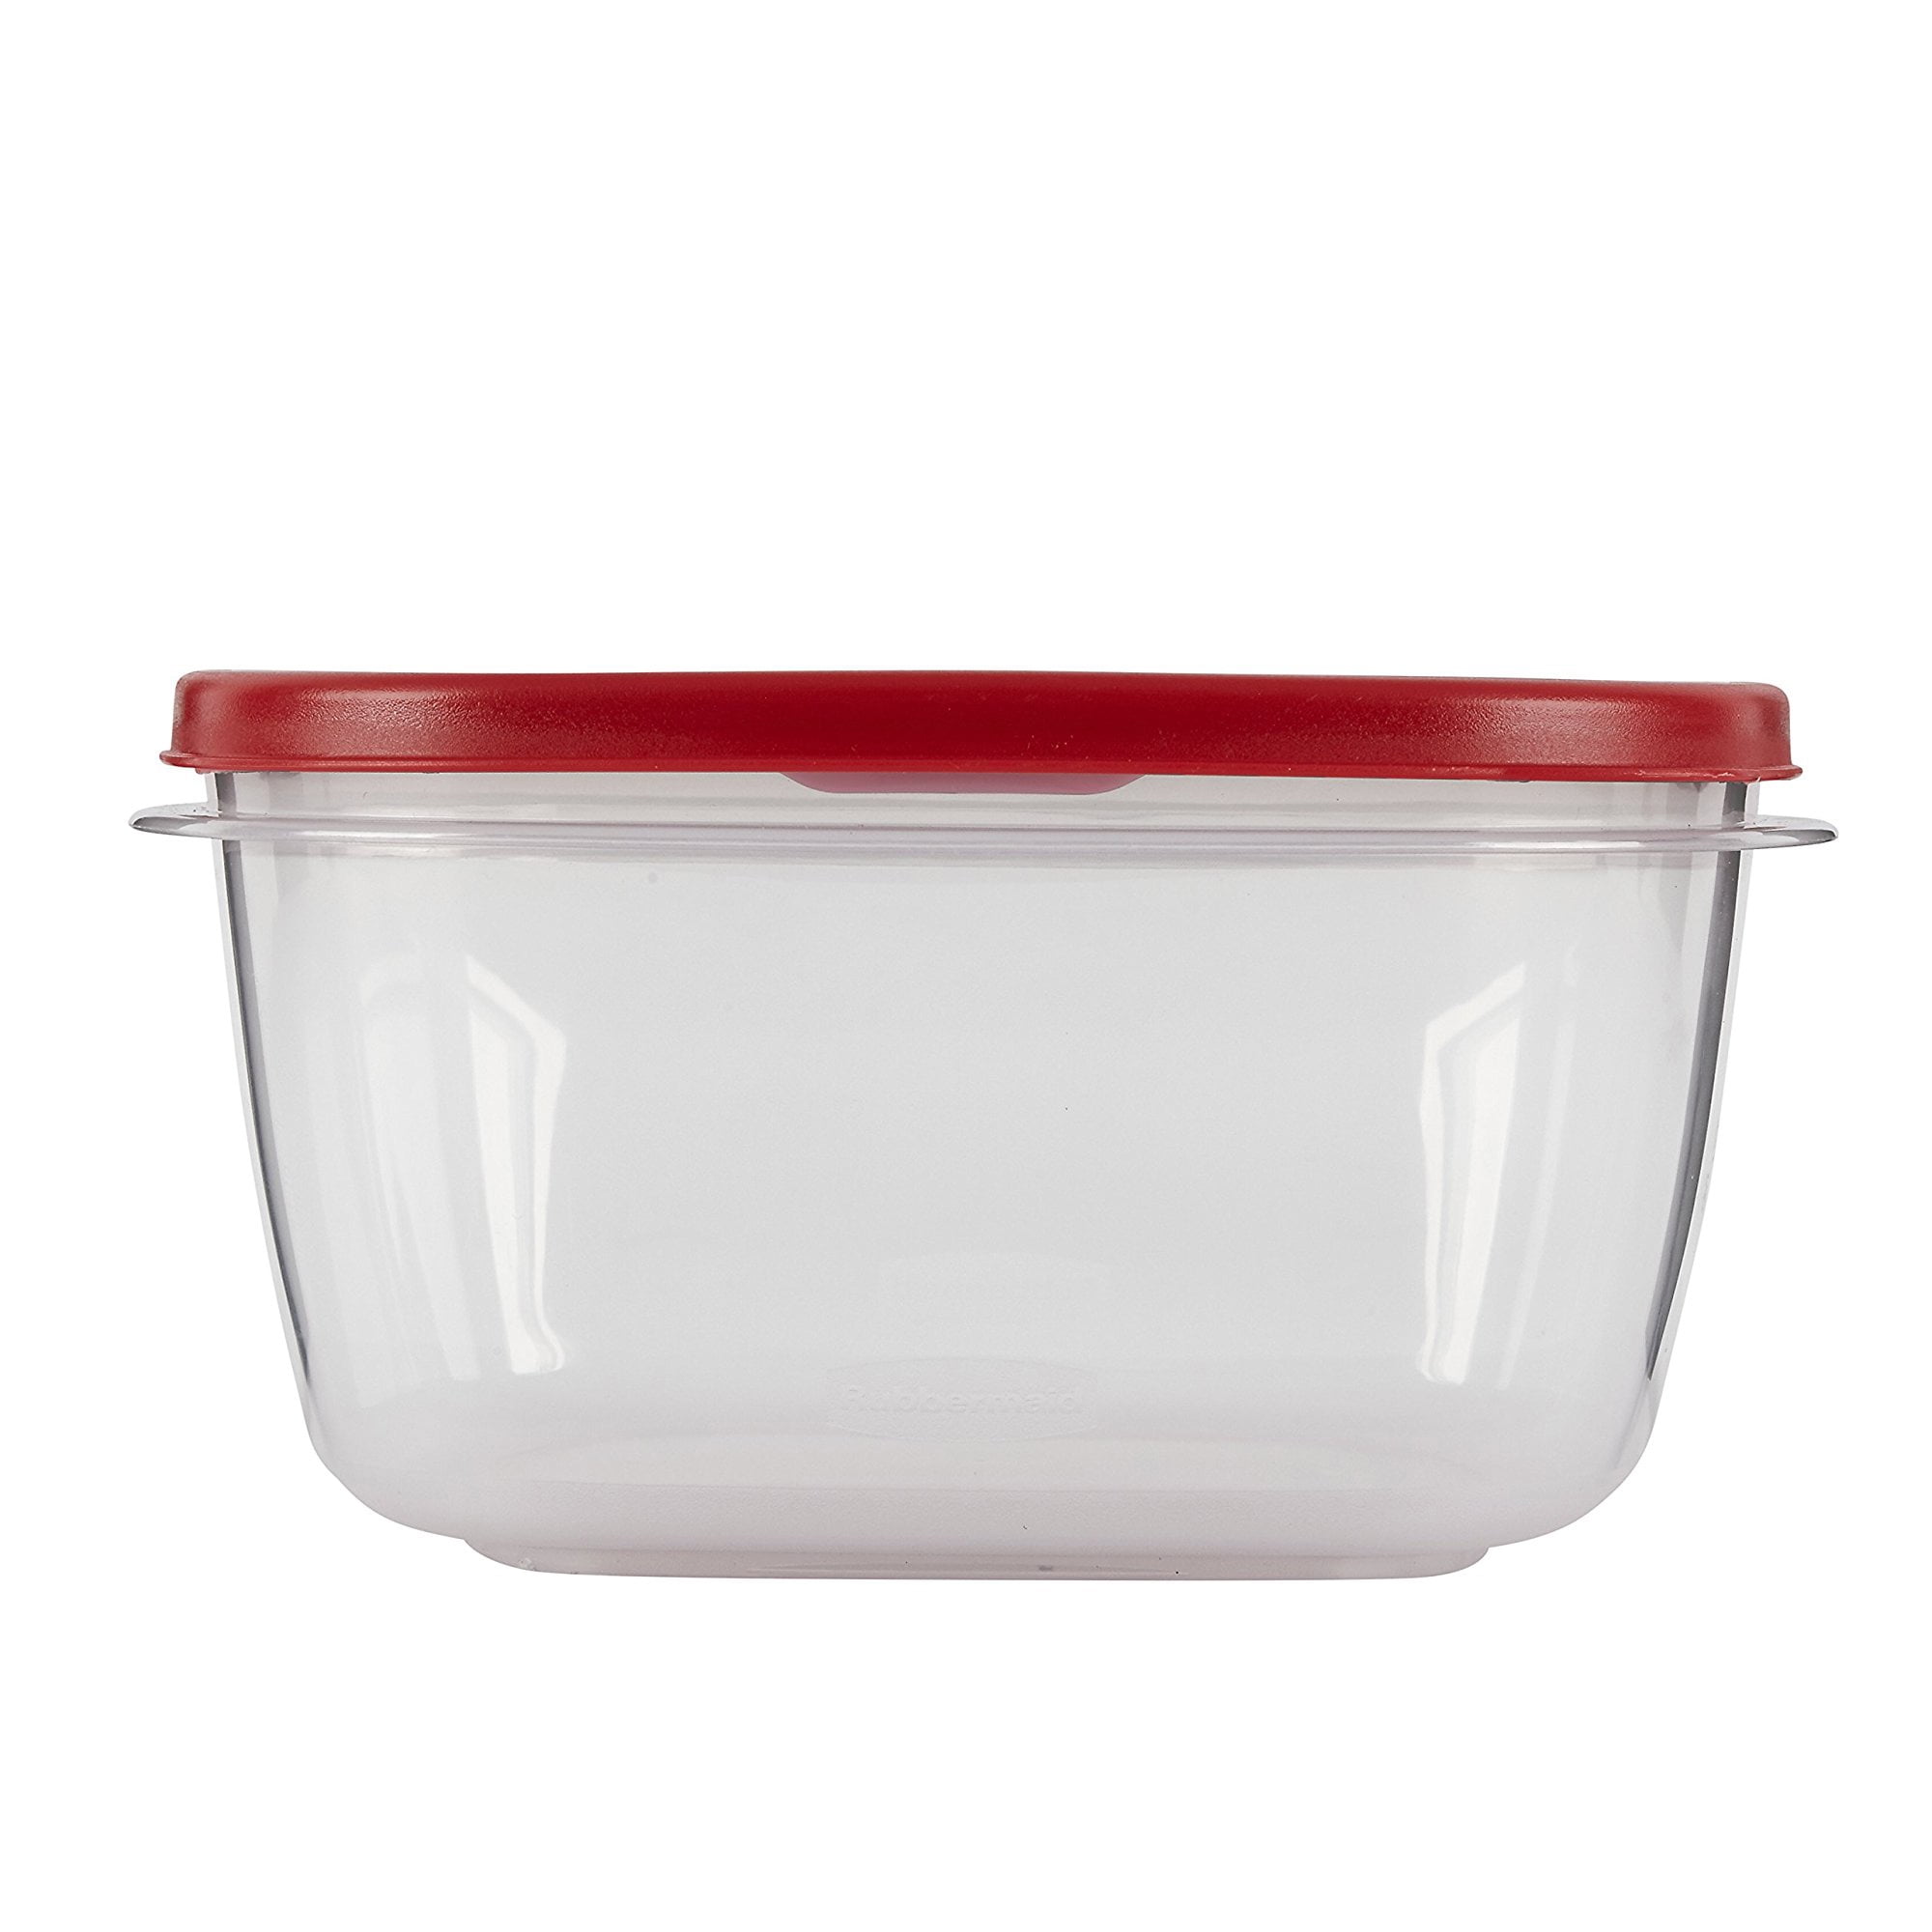 Rubbermaid Servin Saver 1.8 pint Food Storage Container #433-1 Aqua with Lid